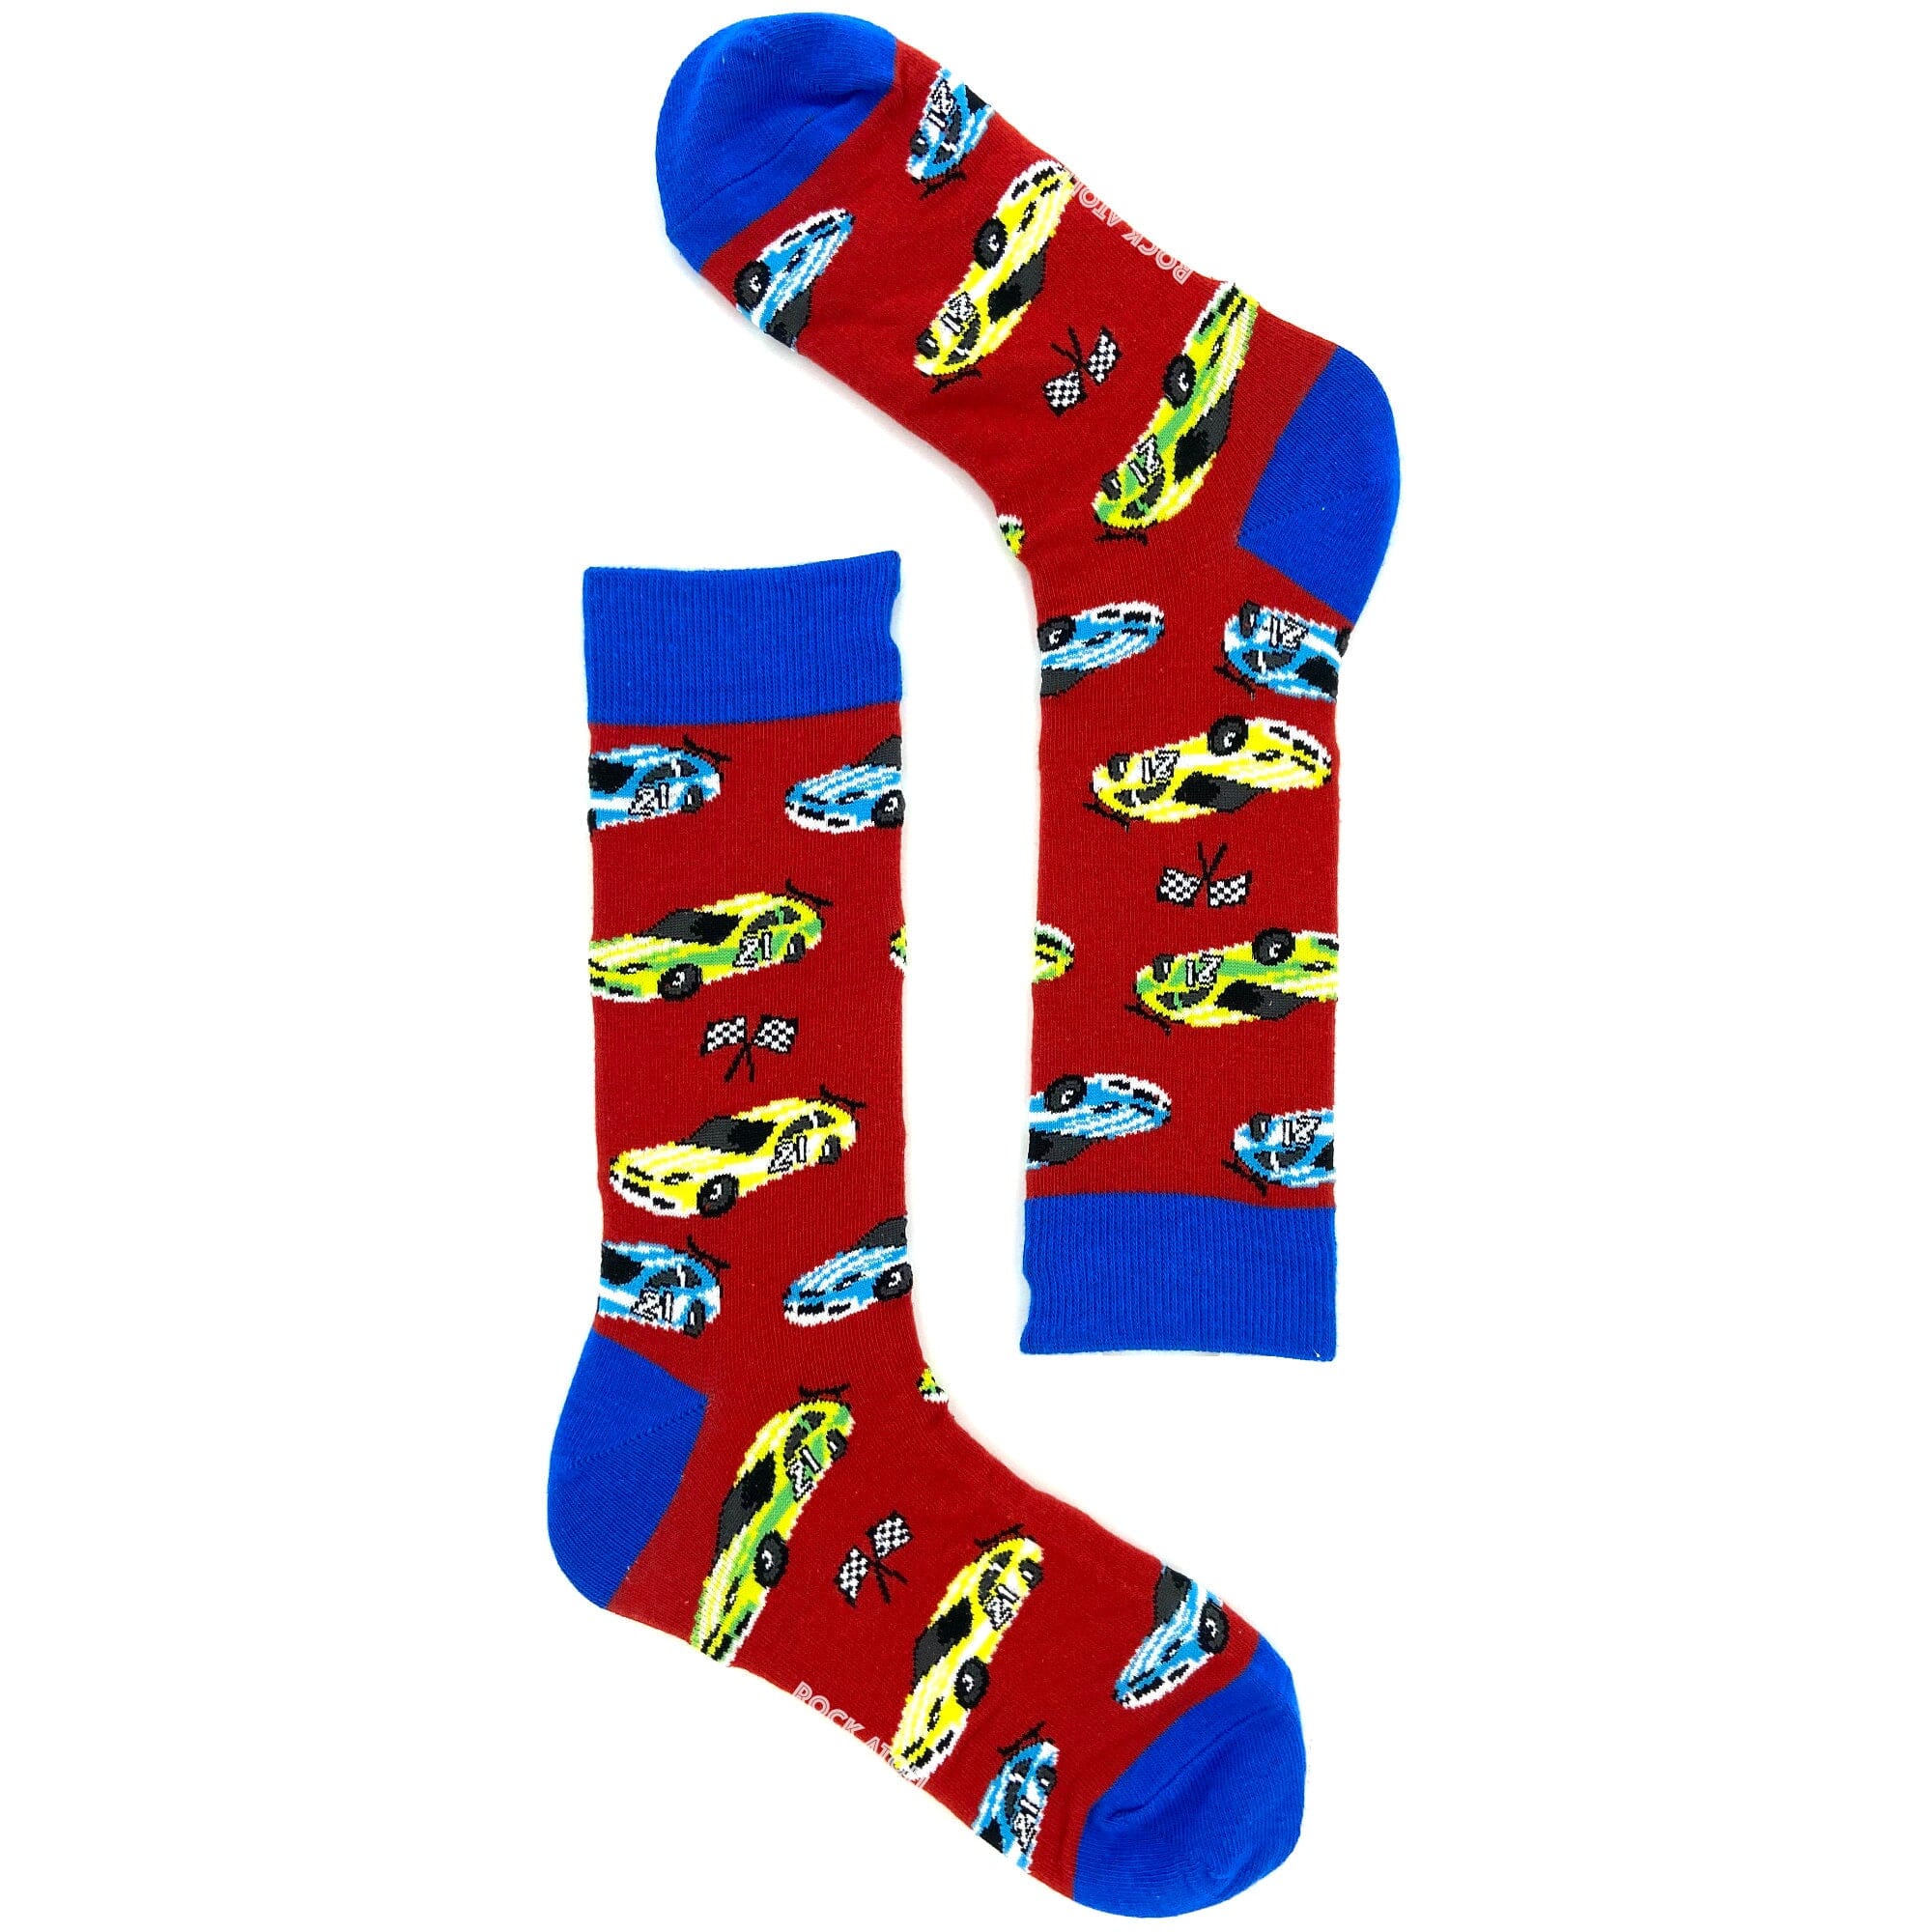 Bright Red Unisex Pit Stop Fancy Race Car Themed Novelty Crew Socks